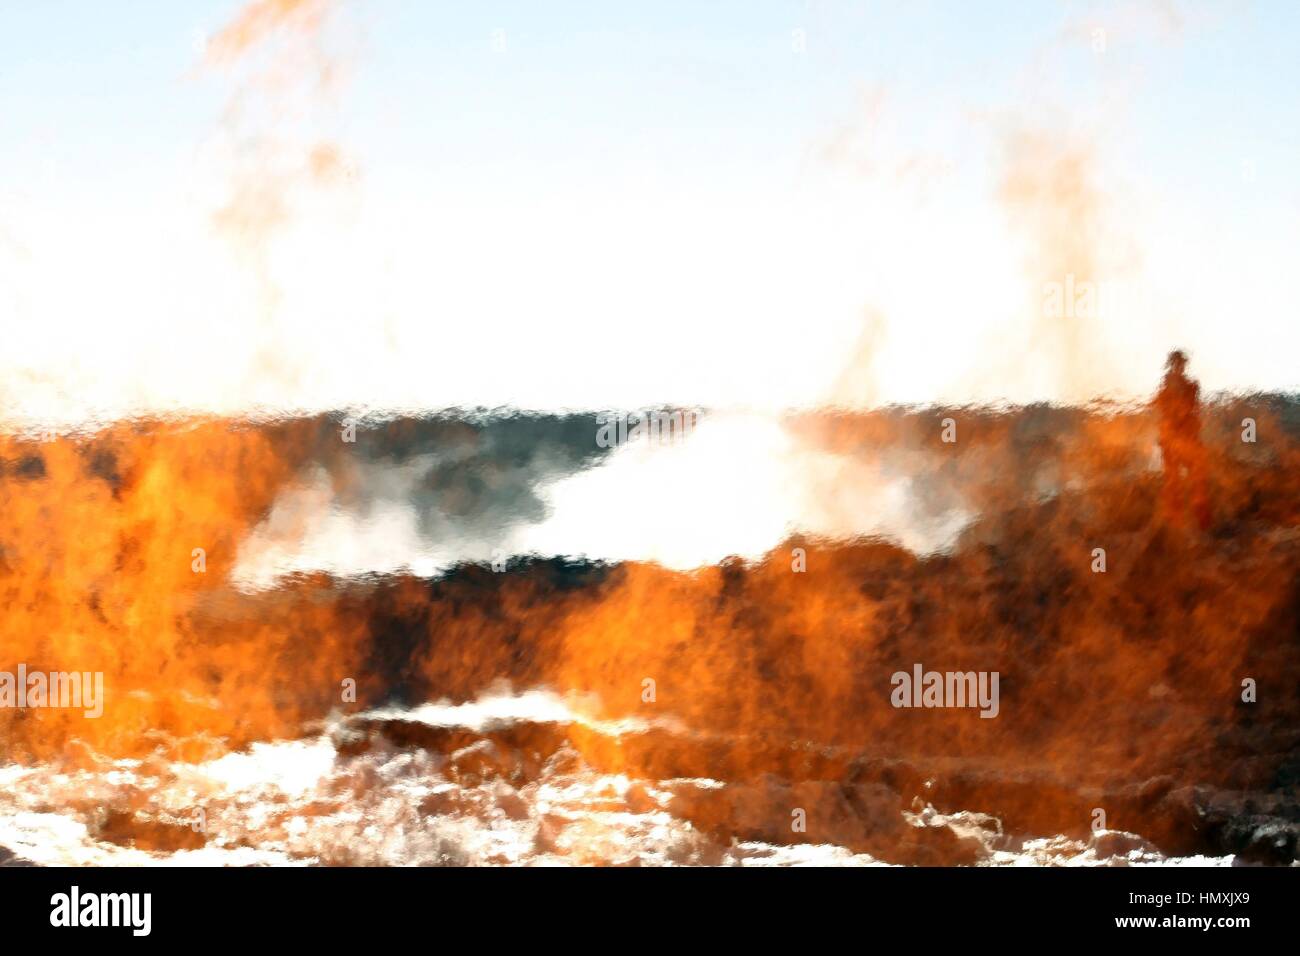 Turkmenistan, China. 6th Feb, 2017. The Door to Hell, a burning natural gas field in Derweze, Turkmenistan. The burning natural gas field where Soviet scientists lit a fire in 1971, is located in the middle of the Karakum Desert. Credit: SIPA Asia/ZUMA Wire/Alamy Live News Stock Photo